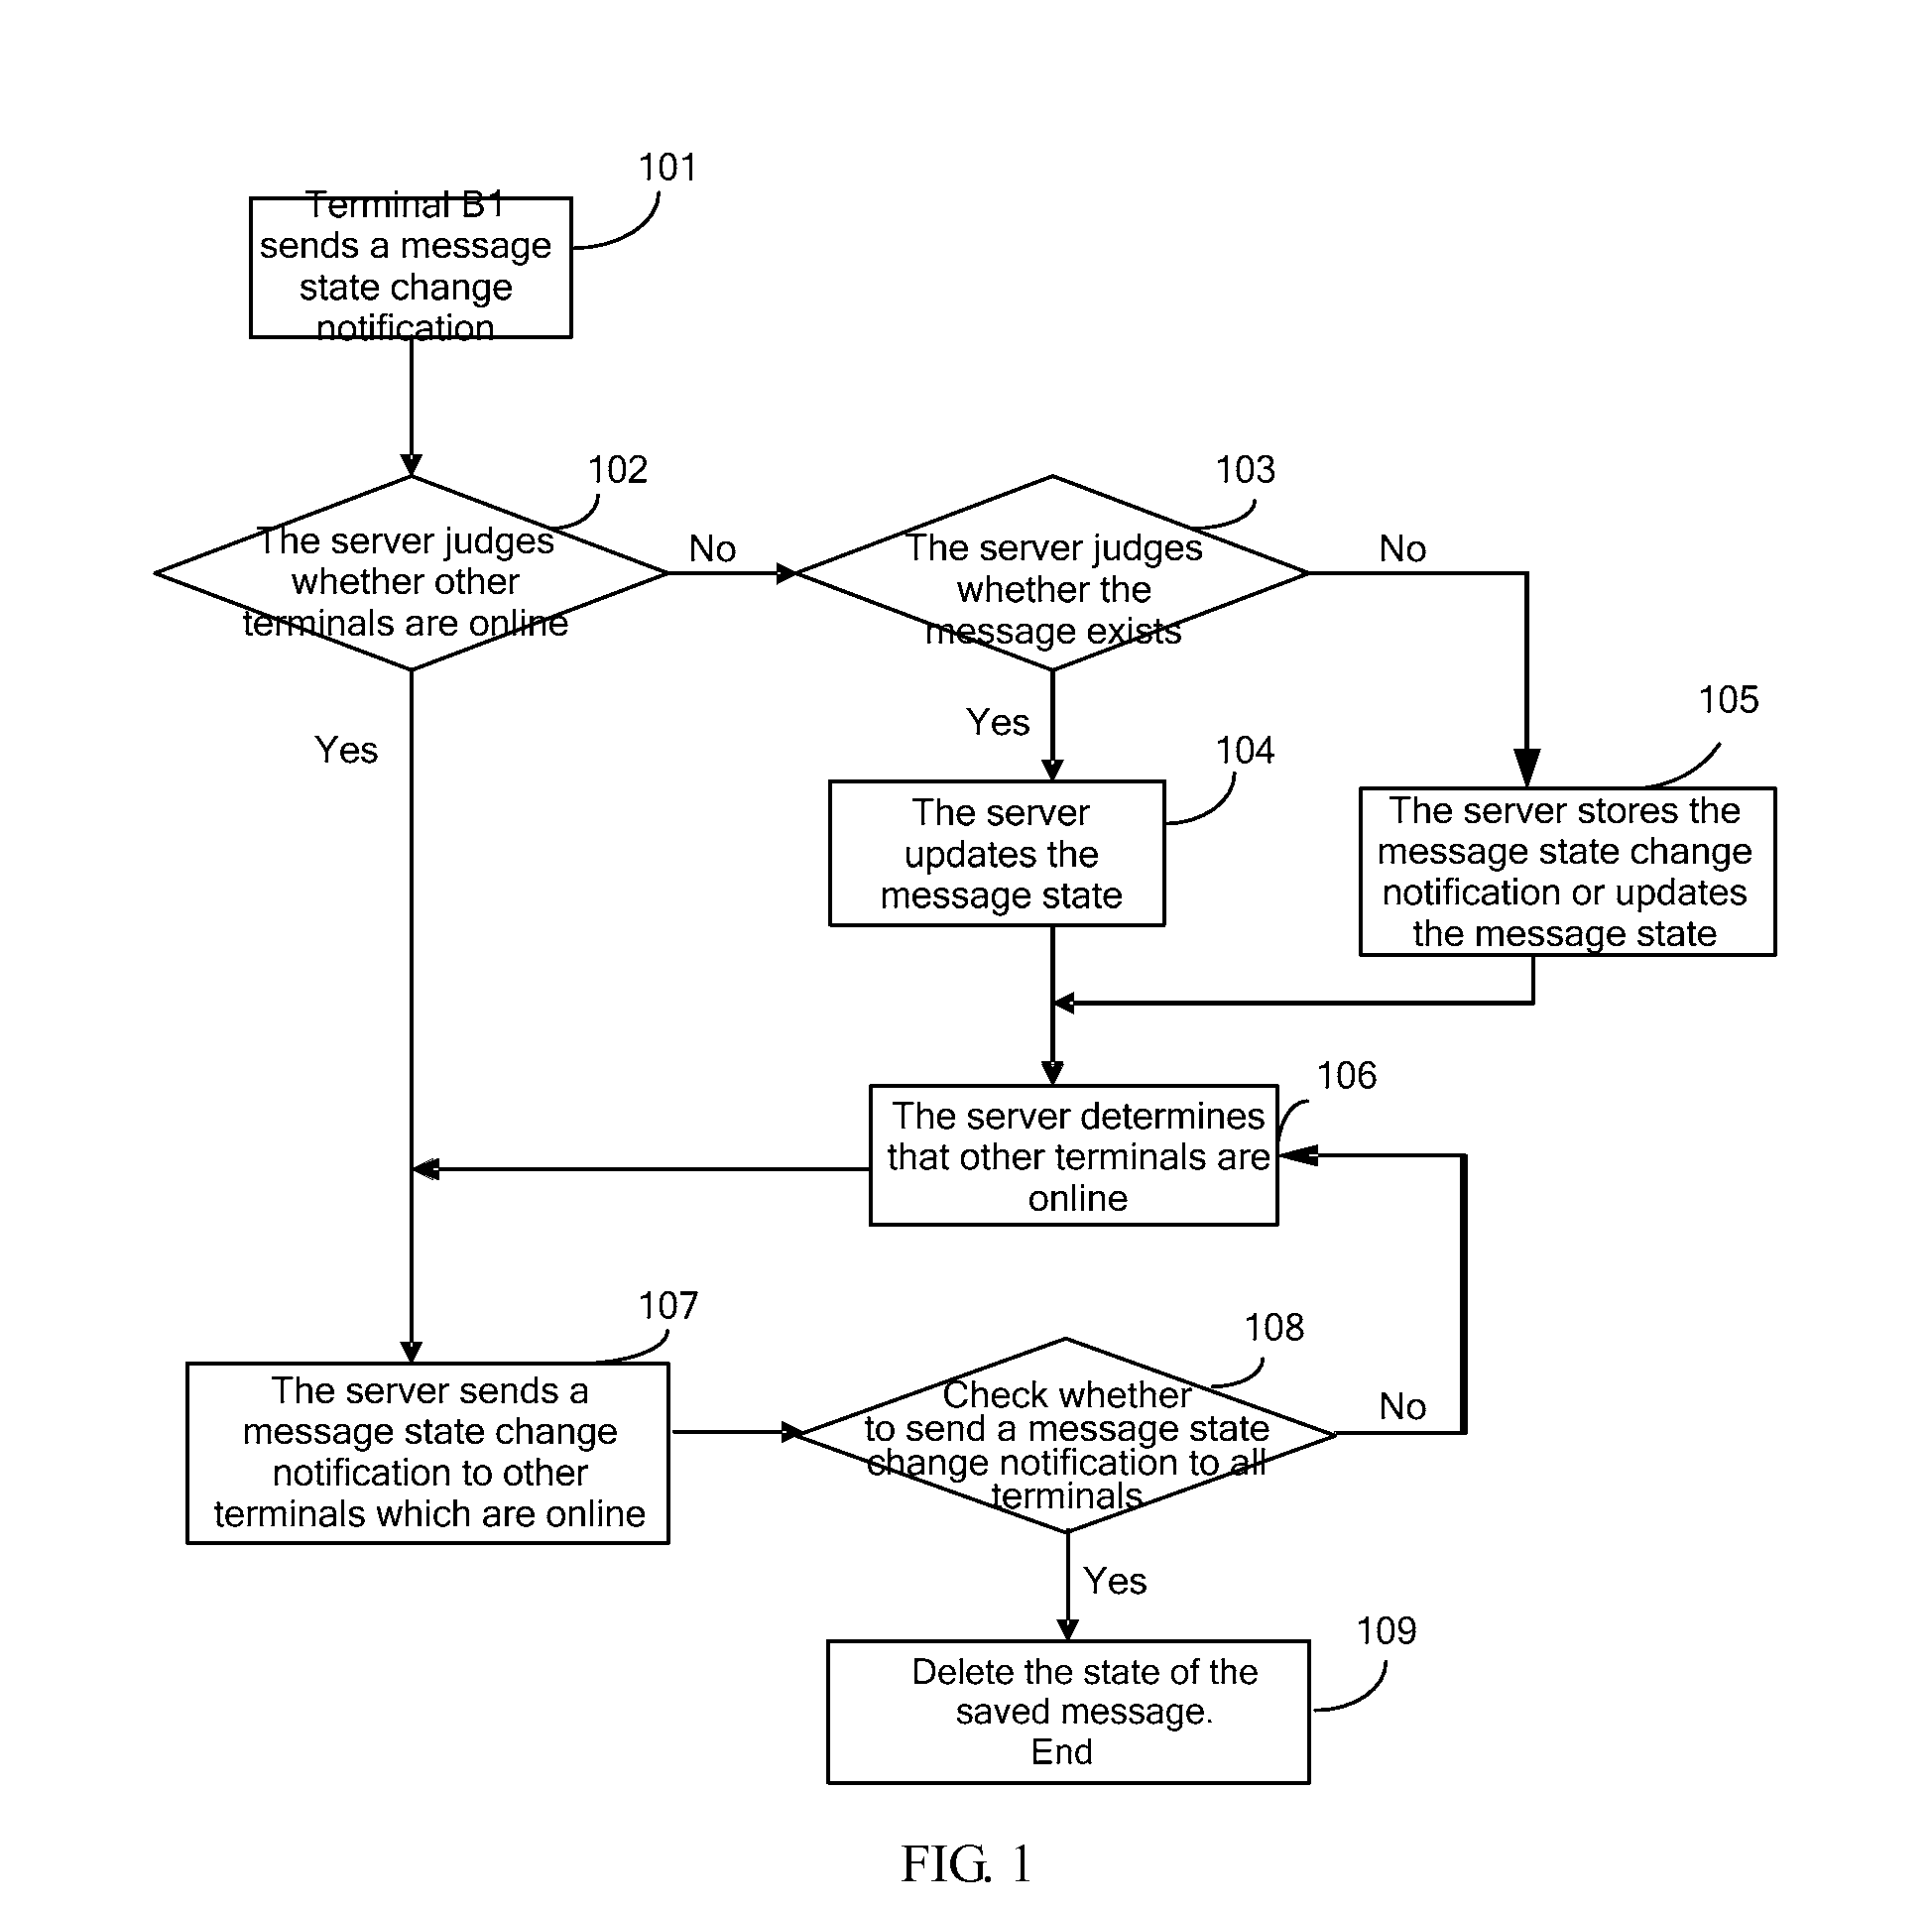 Method and apparatus for synchronizing messages between multiple terminals